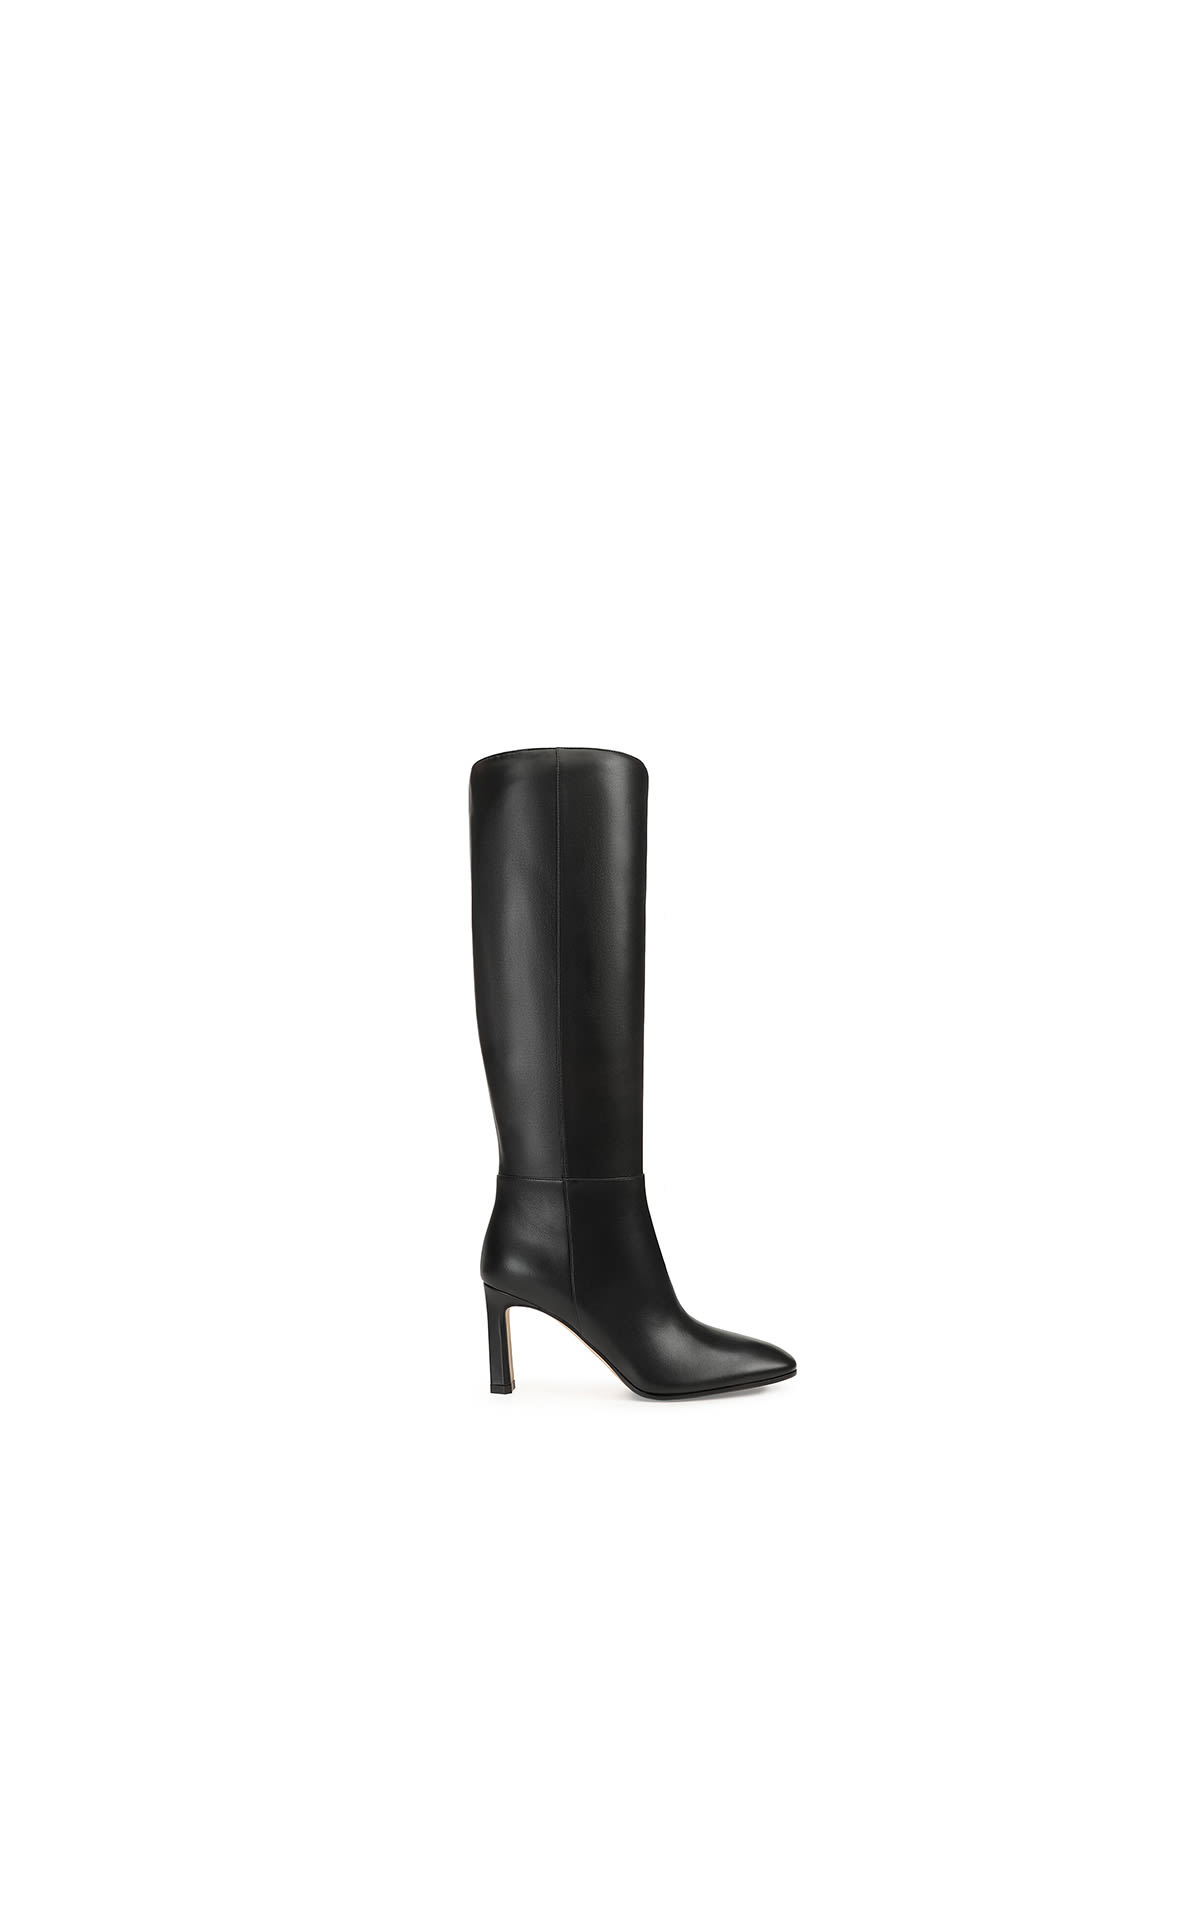 Sergio Rossi Soft black leather boots